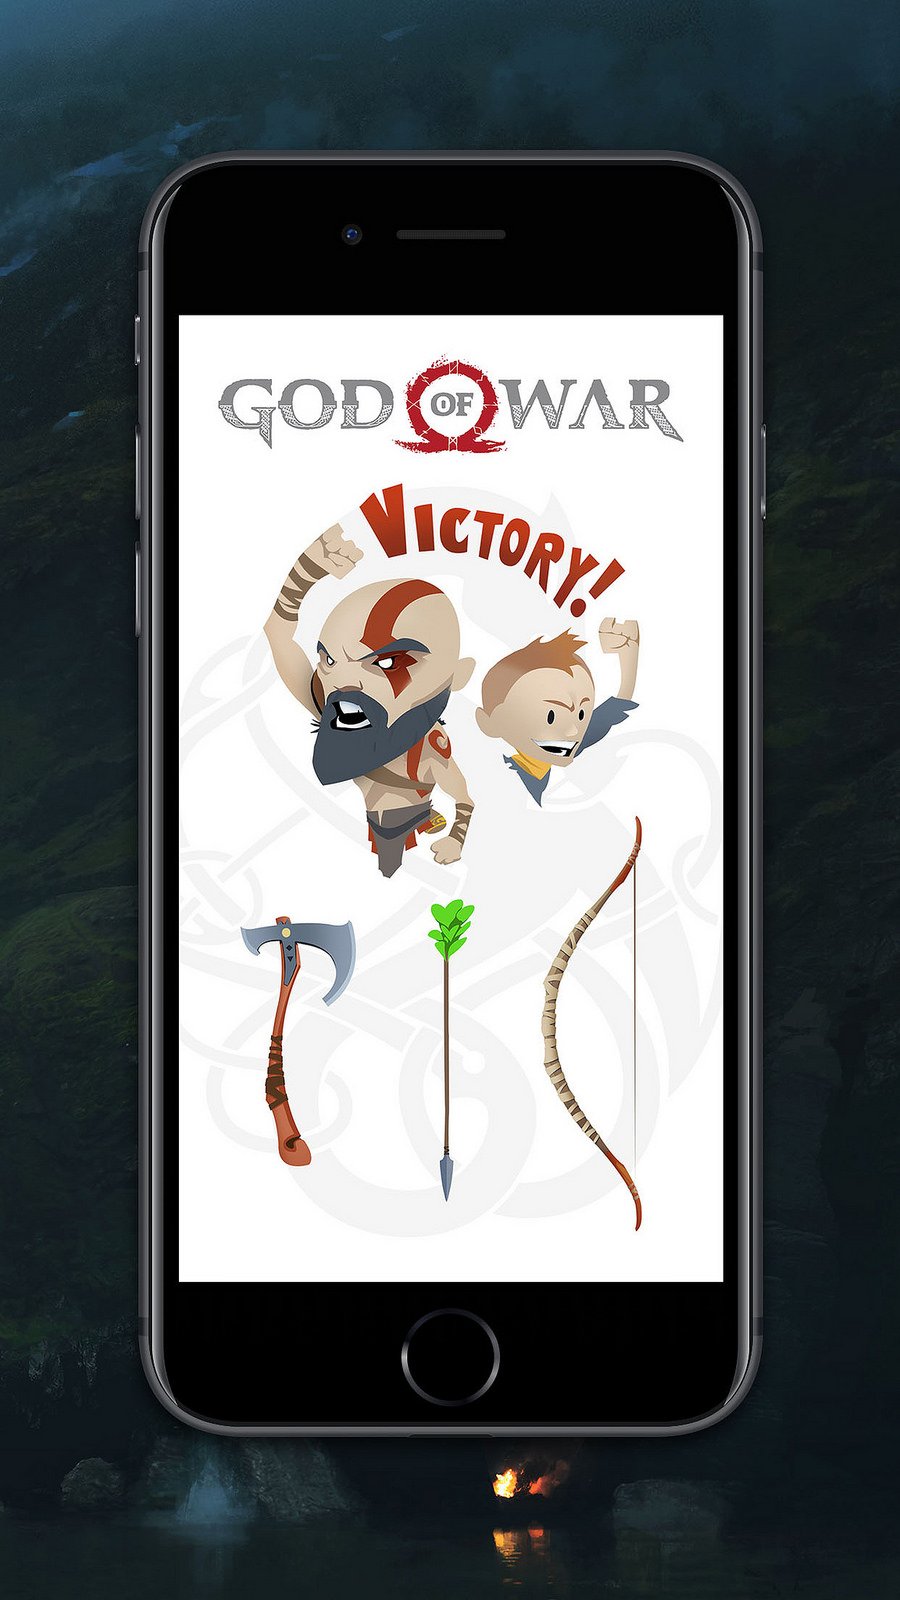 God-of-War-stickers-mobiles-02-09-05-2018